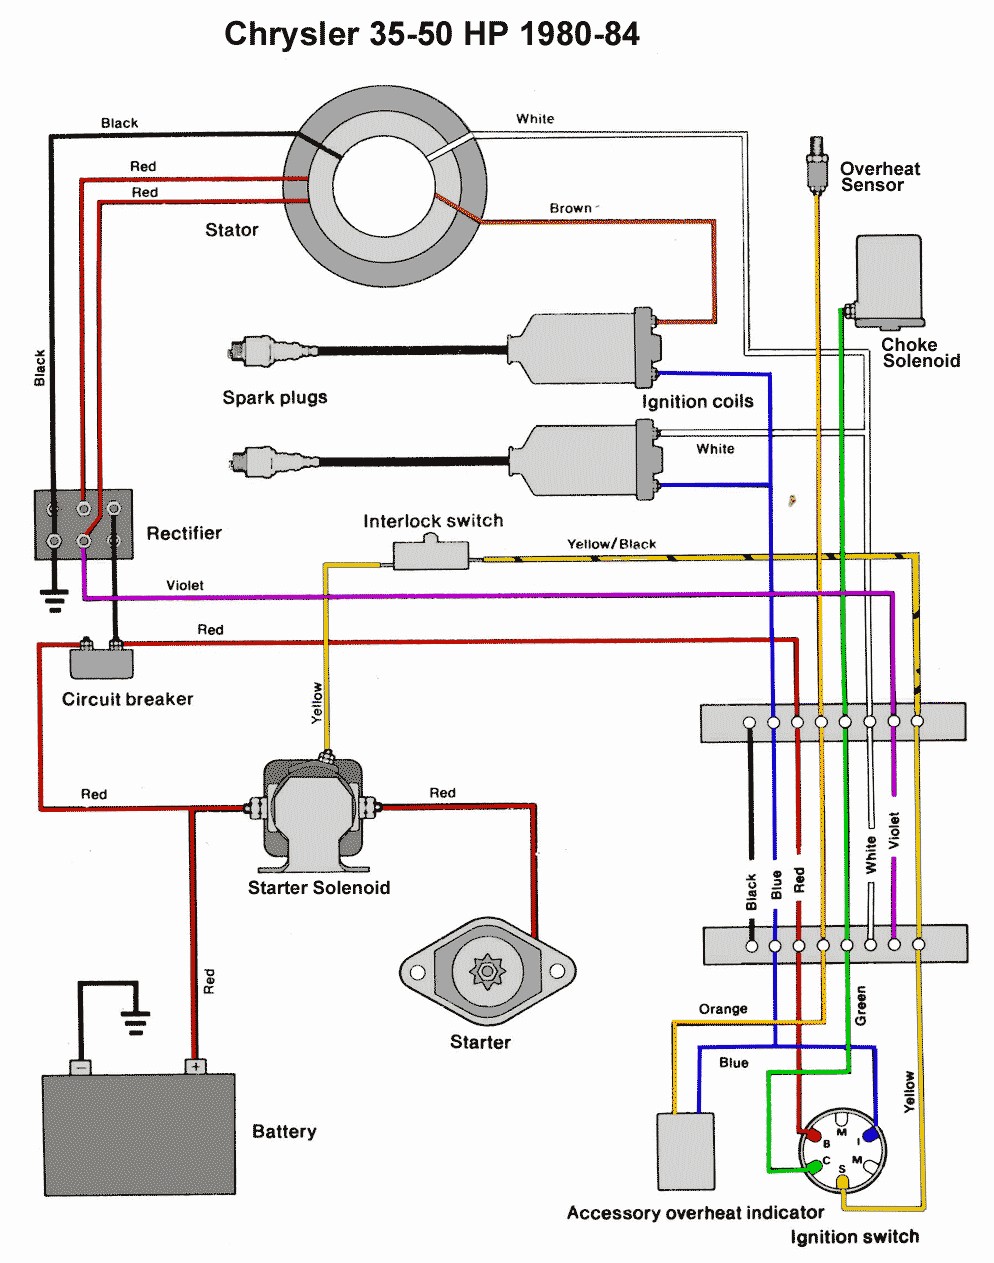 Wiring Manual PDF: 115 Hp Mercury Outboard Ignition Wiring Diagram